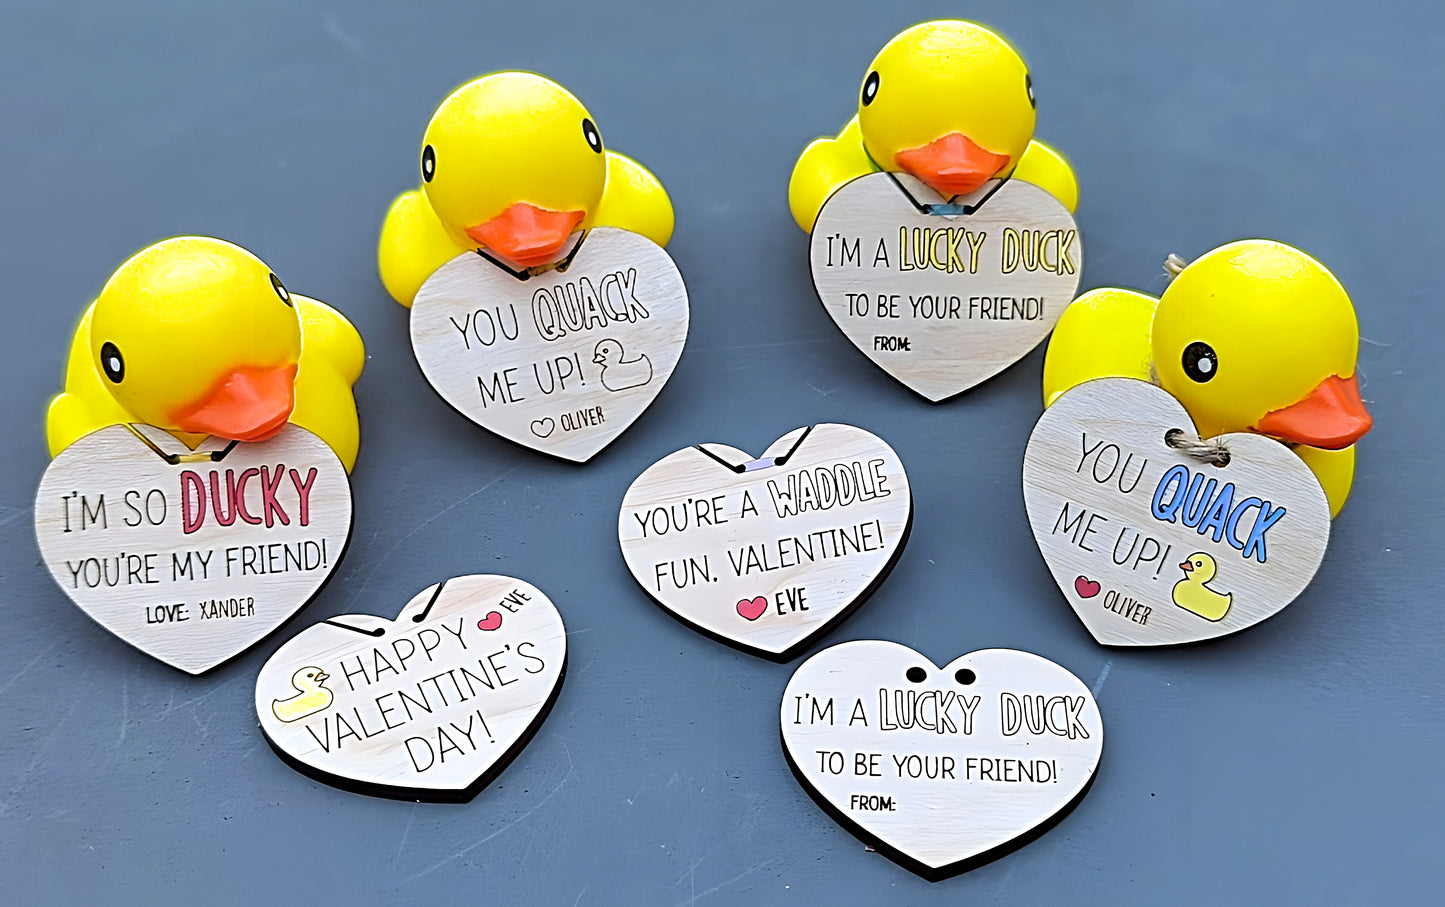 Classroom valentine svg, Rubber duck tags digital file, Quick easy valentine gift, Cut and score Laser cut file, Glowforge Digital Download